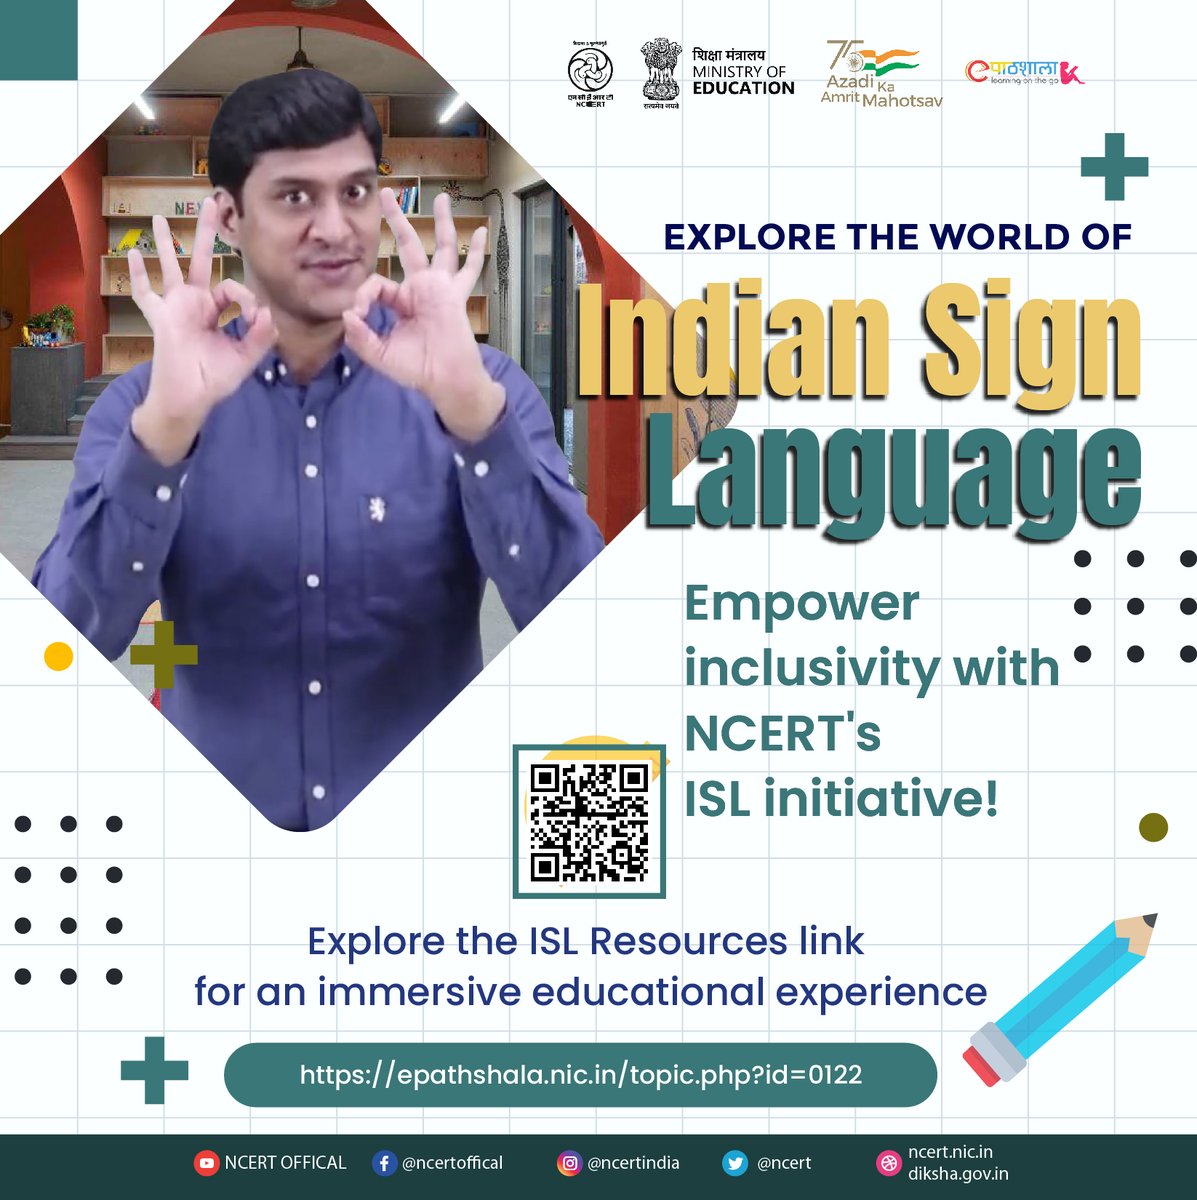 Join NCERT in celebrating inclusivity and breaking barriers in education!
Our commitment to Universal Design for Learning (UDL) is evident in the development of Teaching Learning Resources in Indian Sign Language (ISL), fostering an inclusive learning environment for students.